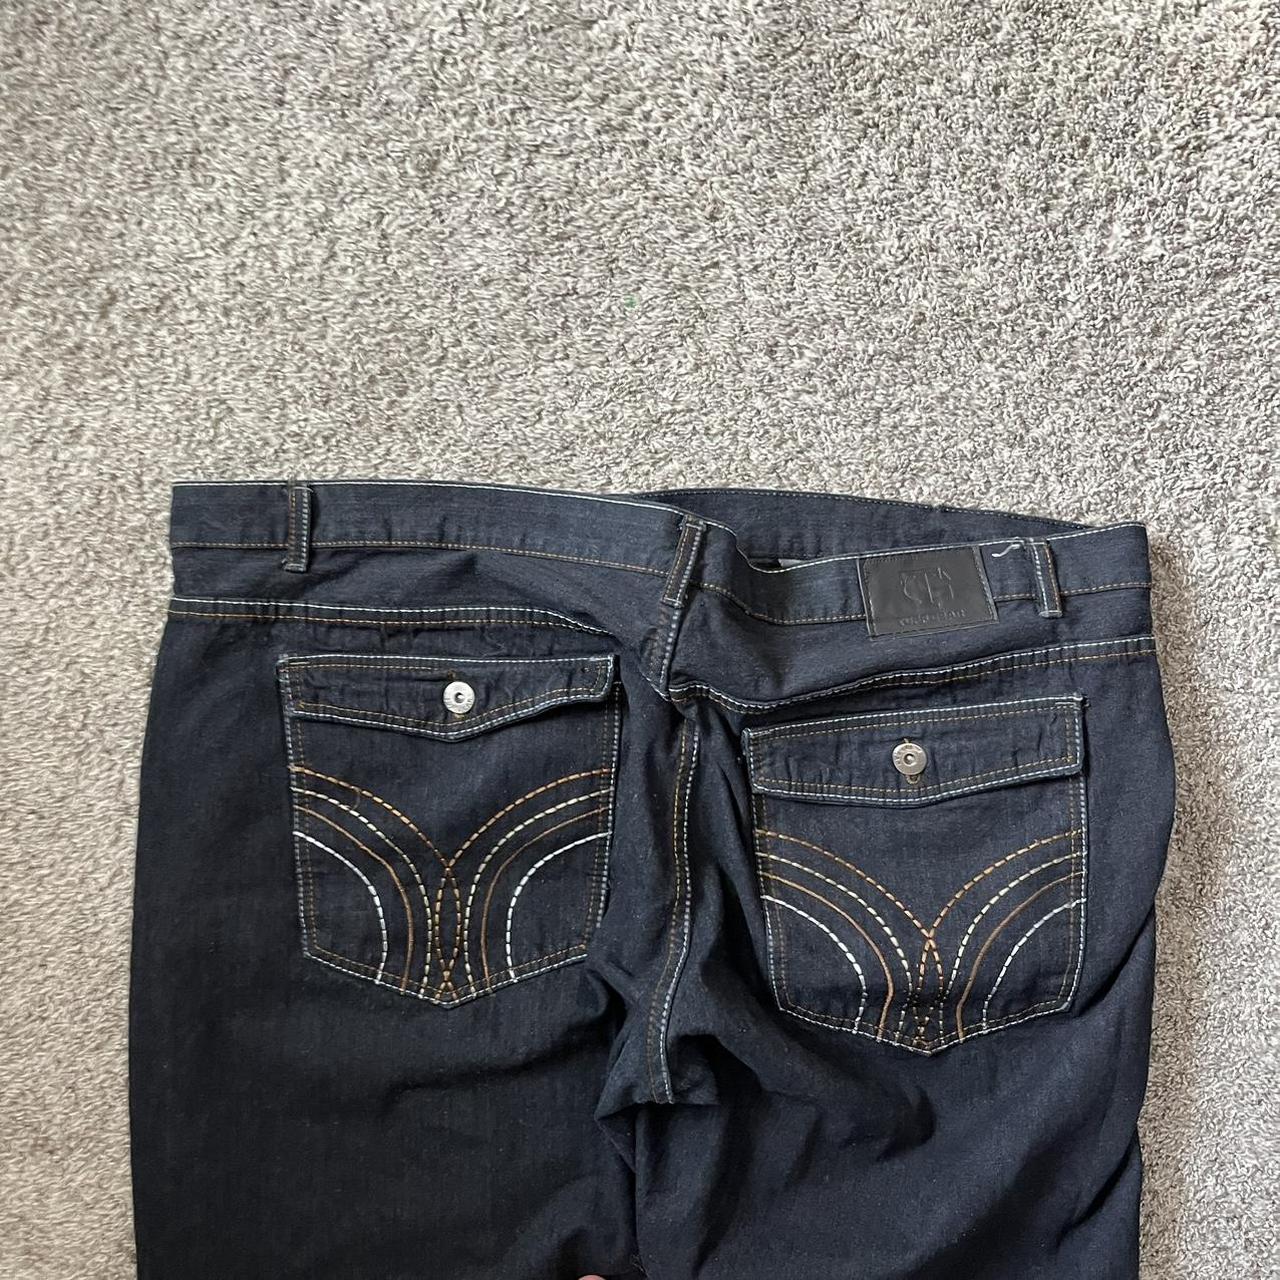 Insanely baggy pair of tuff gear jeans, dm me with... - Depop